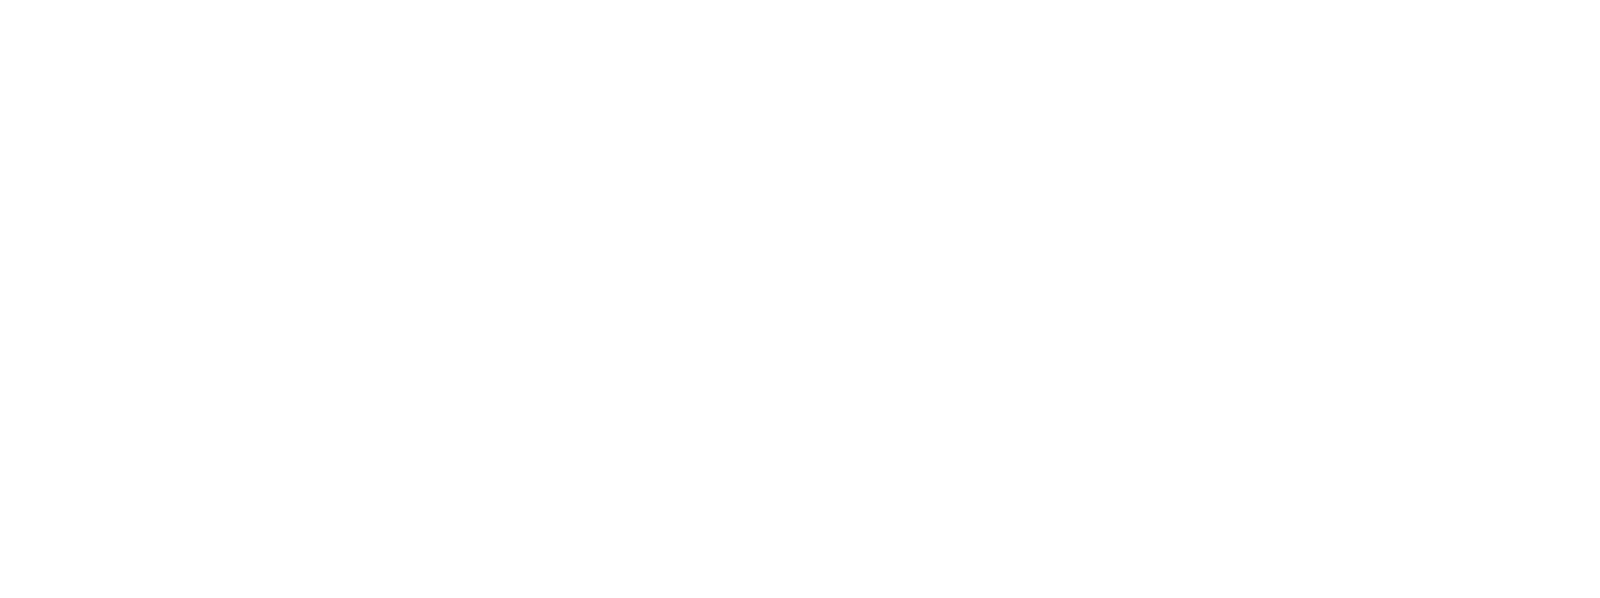 Tri-County Funeral Home Logo